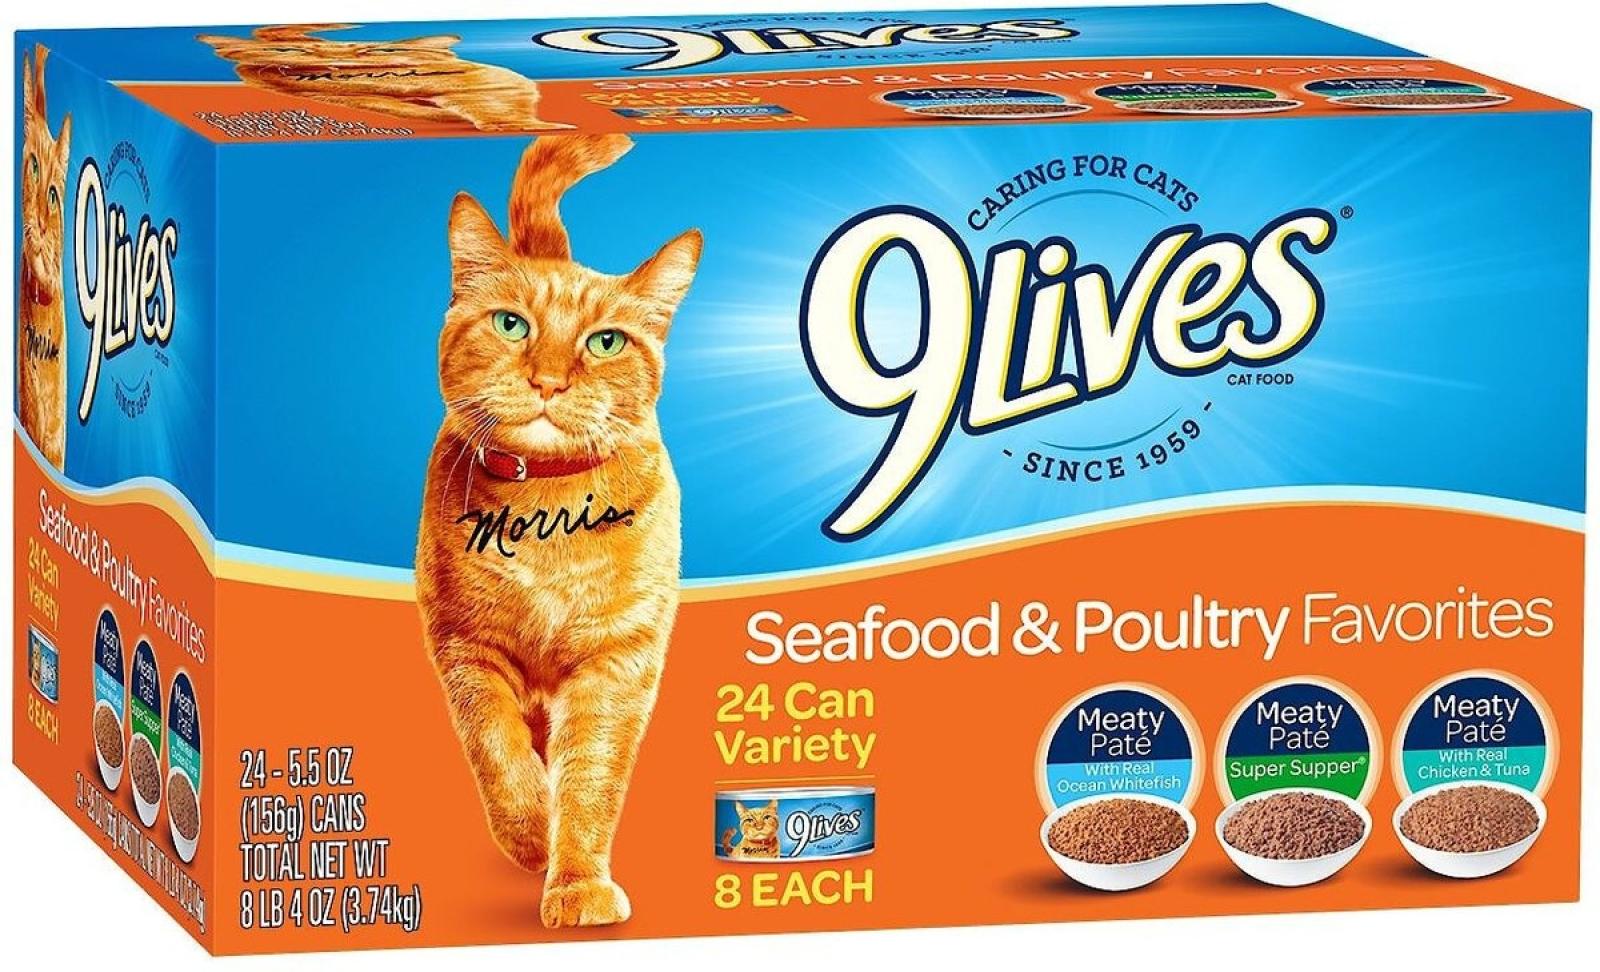 9Lives Seafood and Poultry Favorites